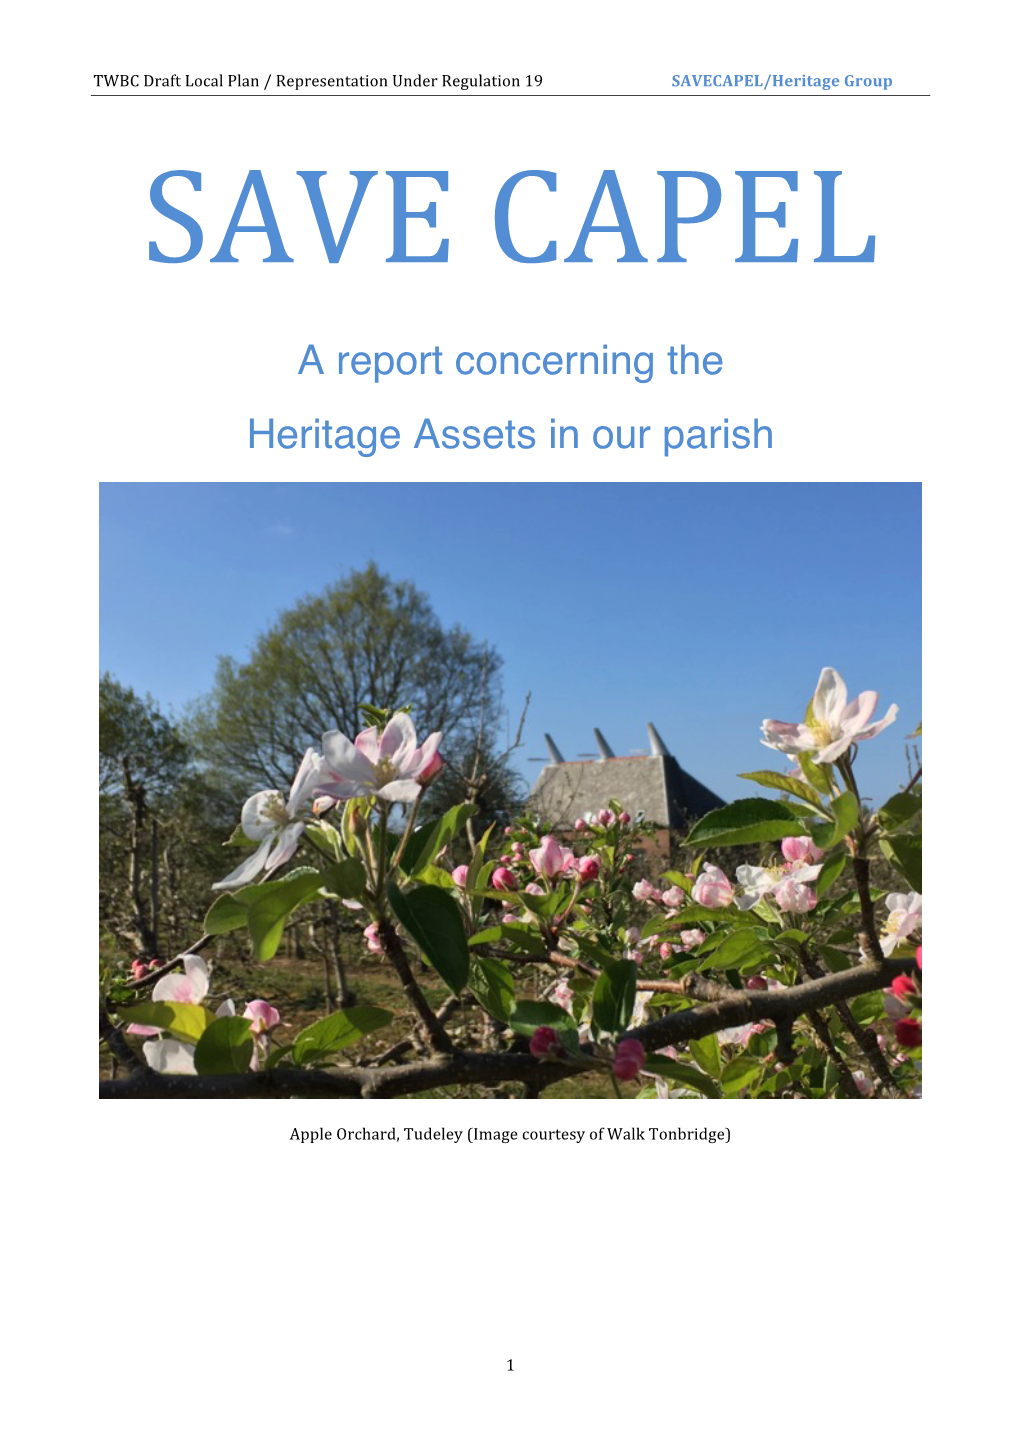 A Report Concerning the Heritage Assets in Our Parish